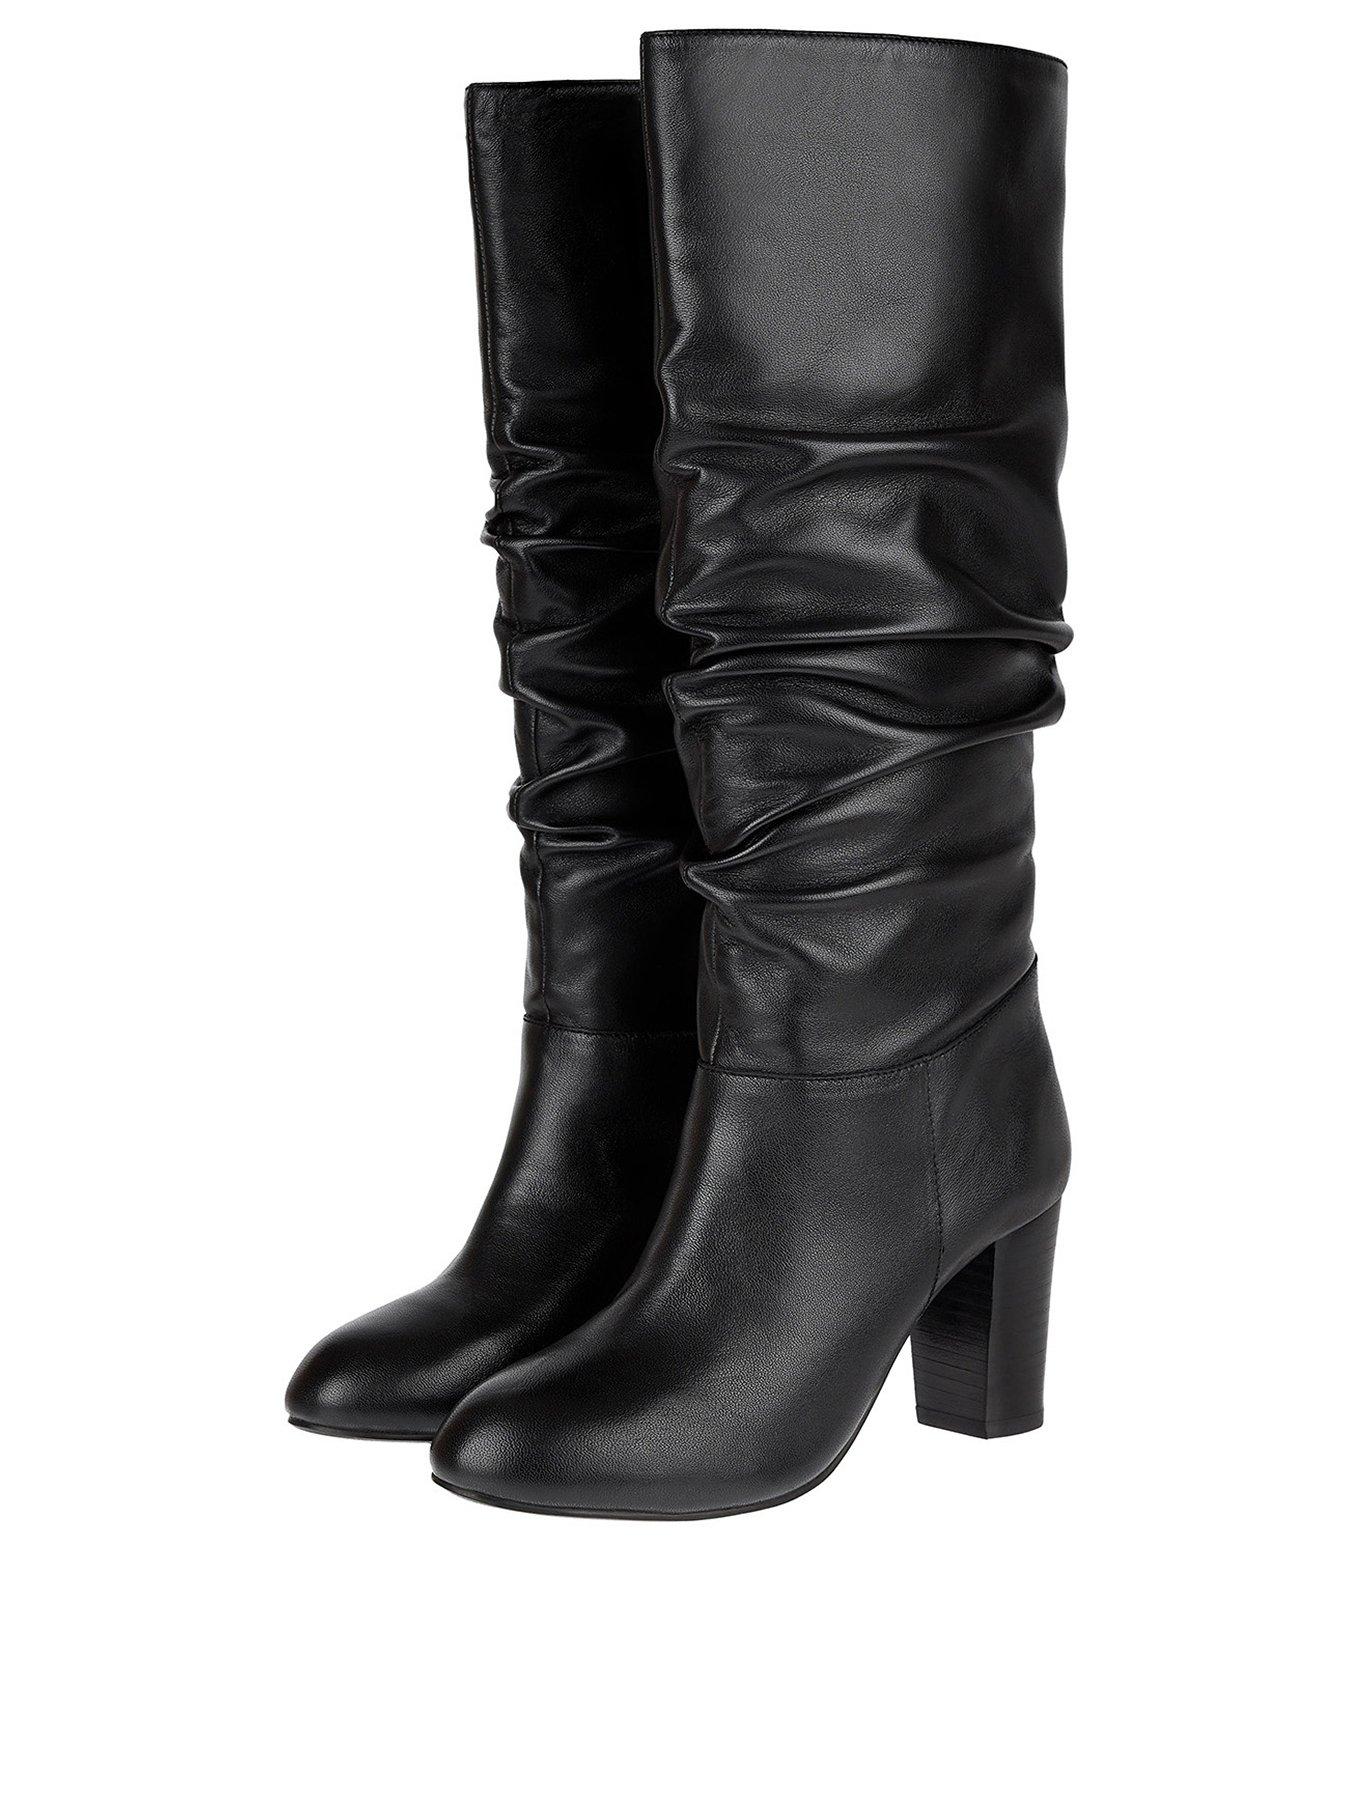 Monsoon Slouch Long Leather Boots - Black | very.co.uk